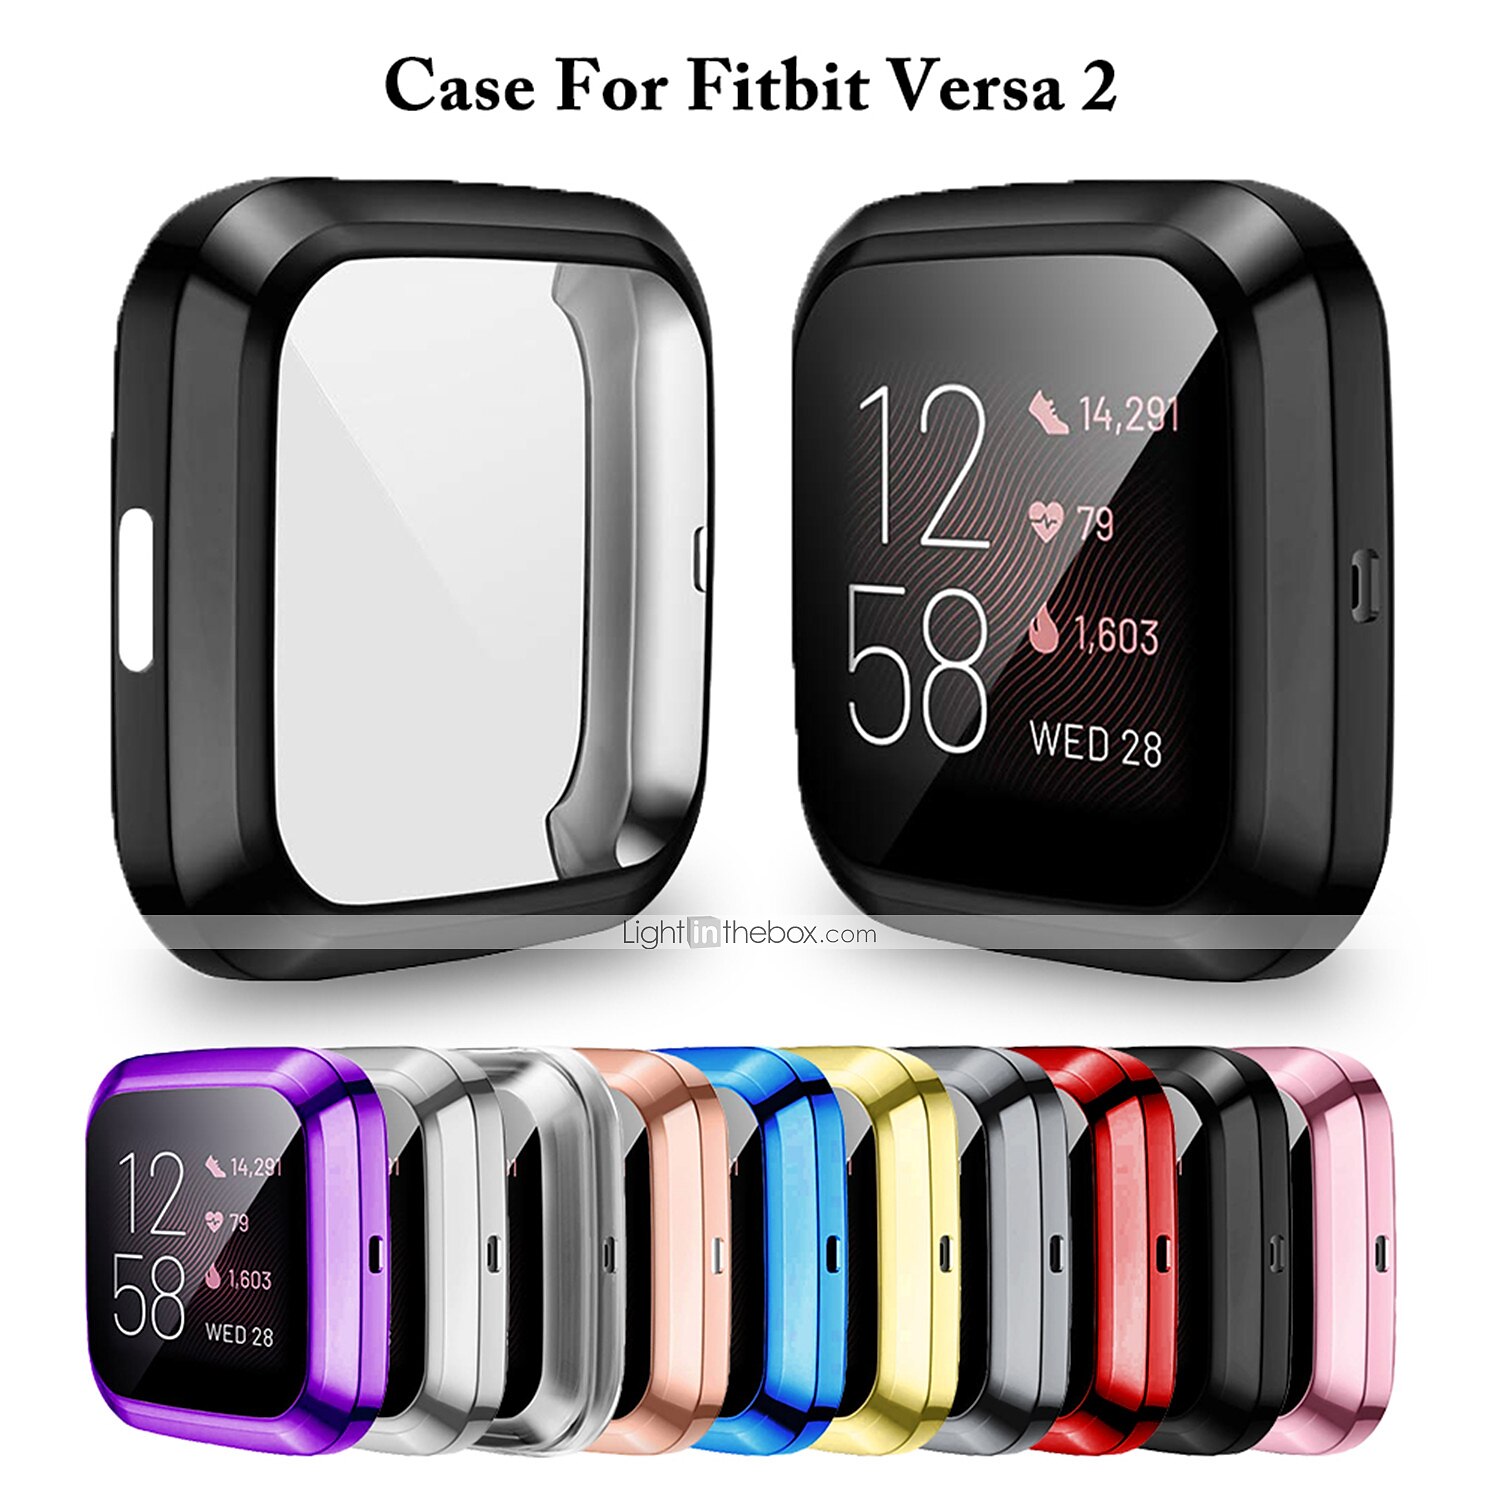 For Fitbit Versa Silicone Protective TPU Shell Case Screen Protector Cover Xmas 